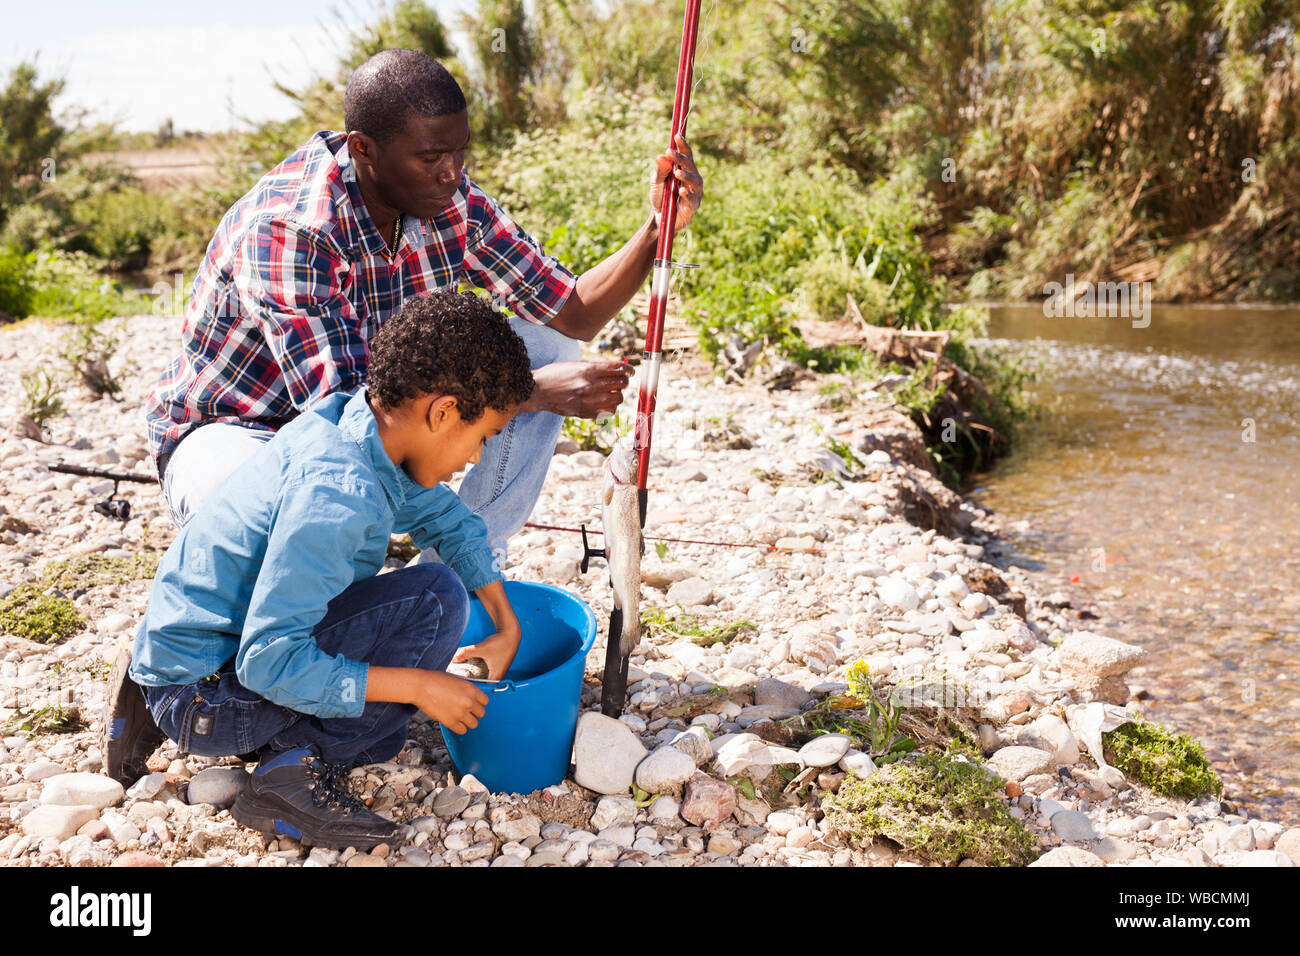 African man and little boy standing near river and holding fish on fishing rod Stock Photo